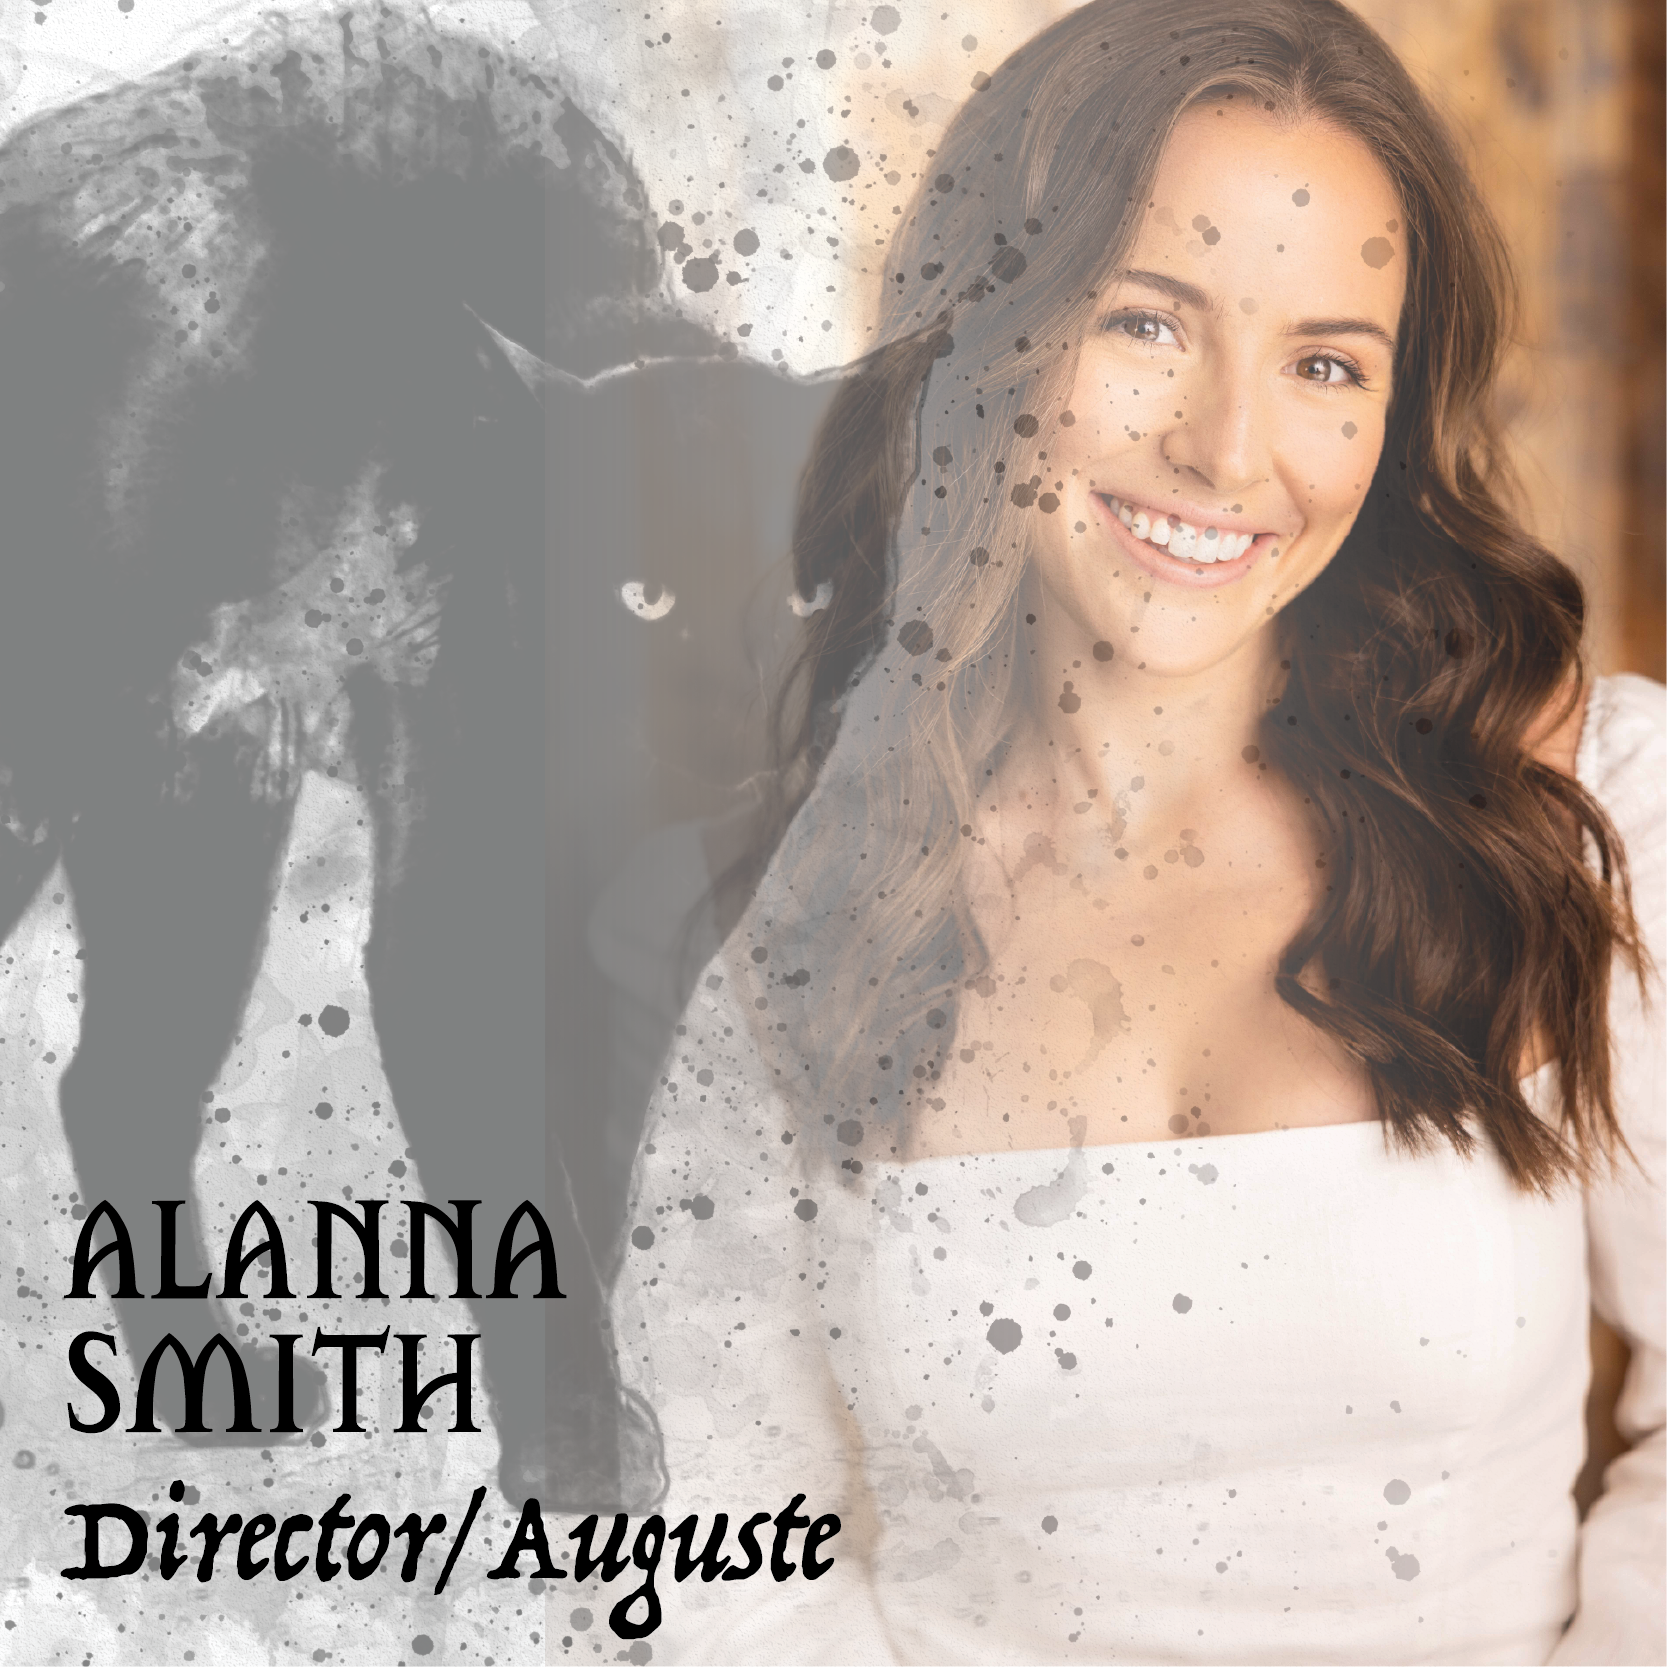 Alanna Smith is Auguste and the Director